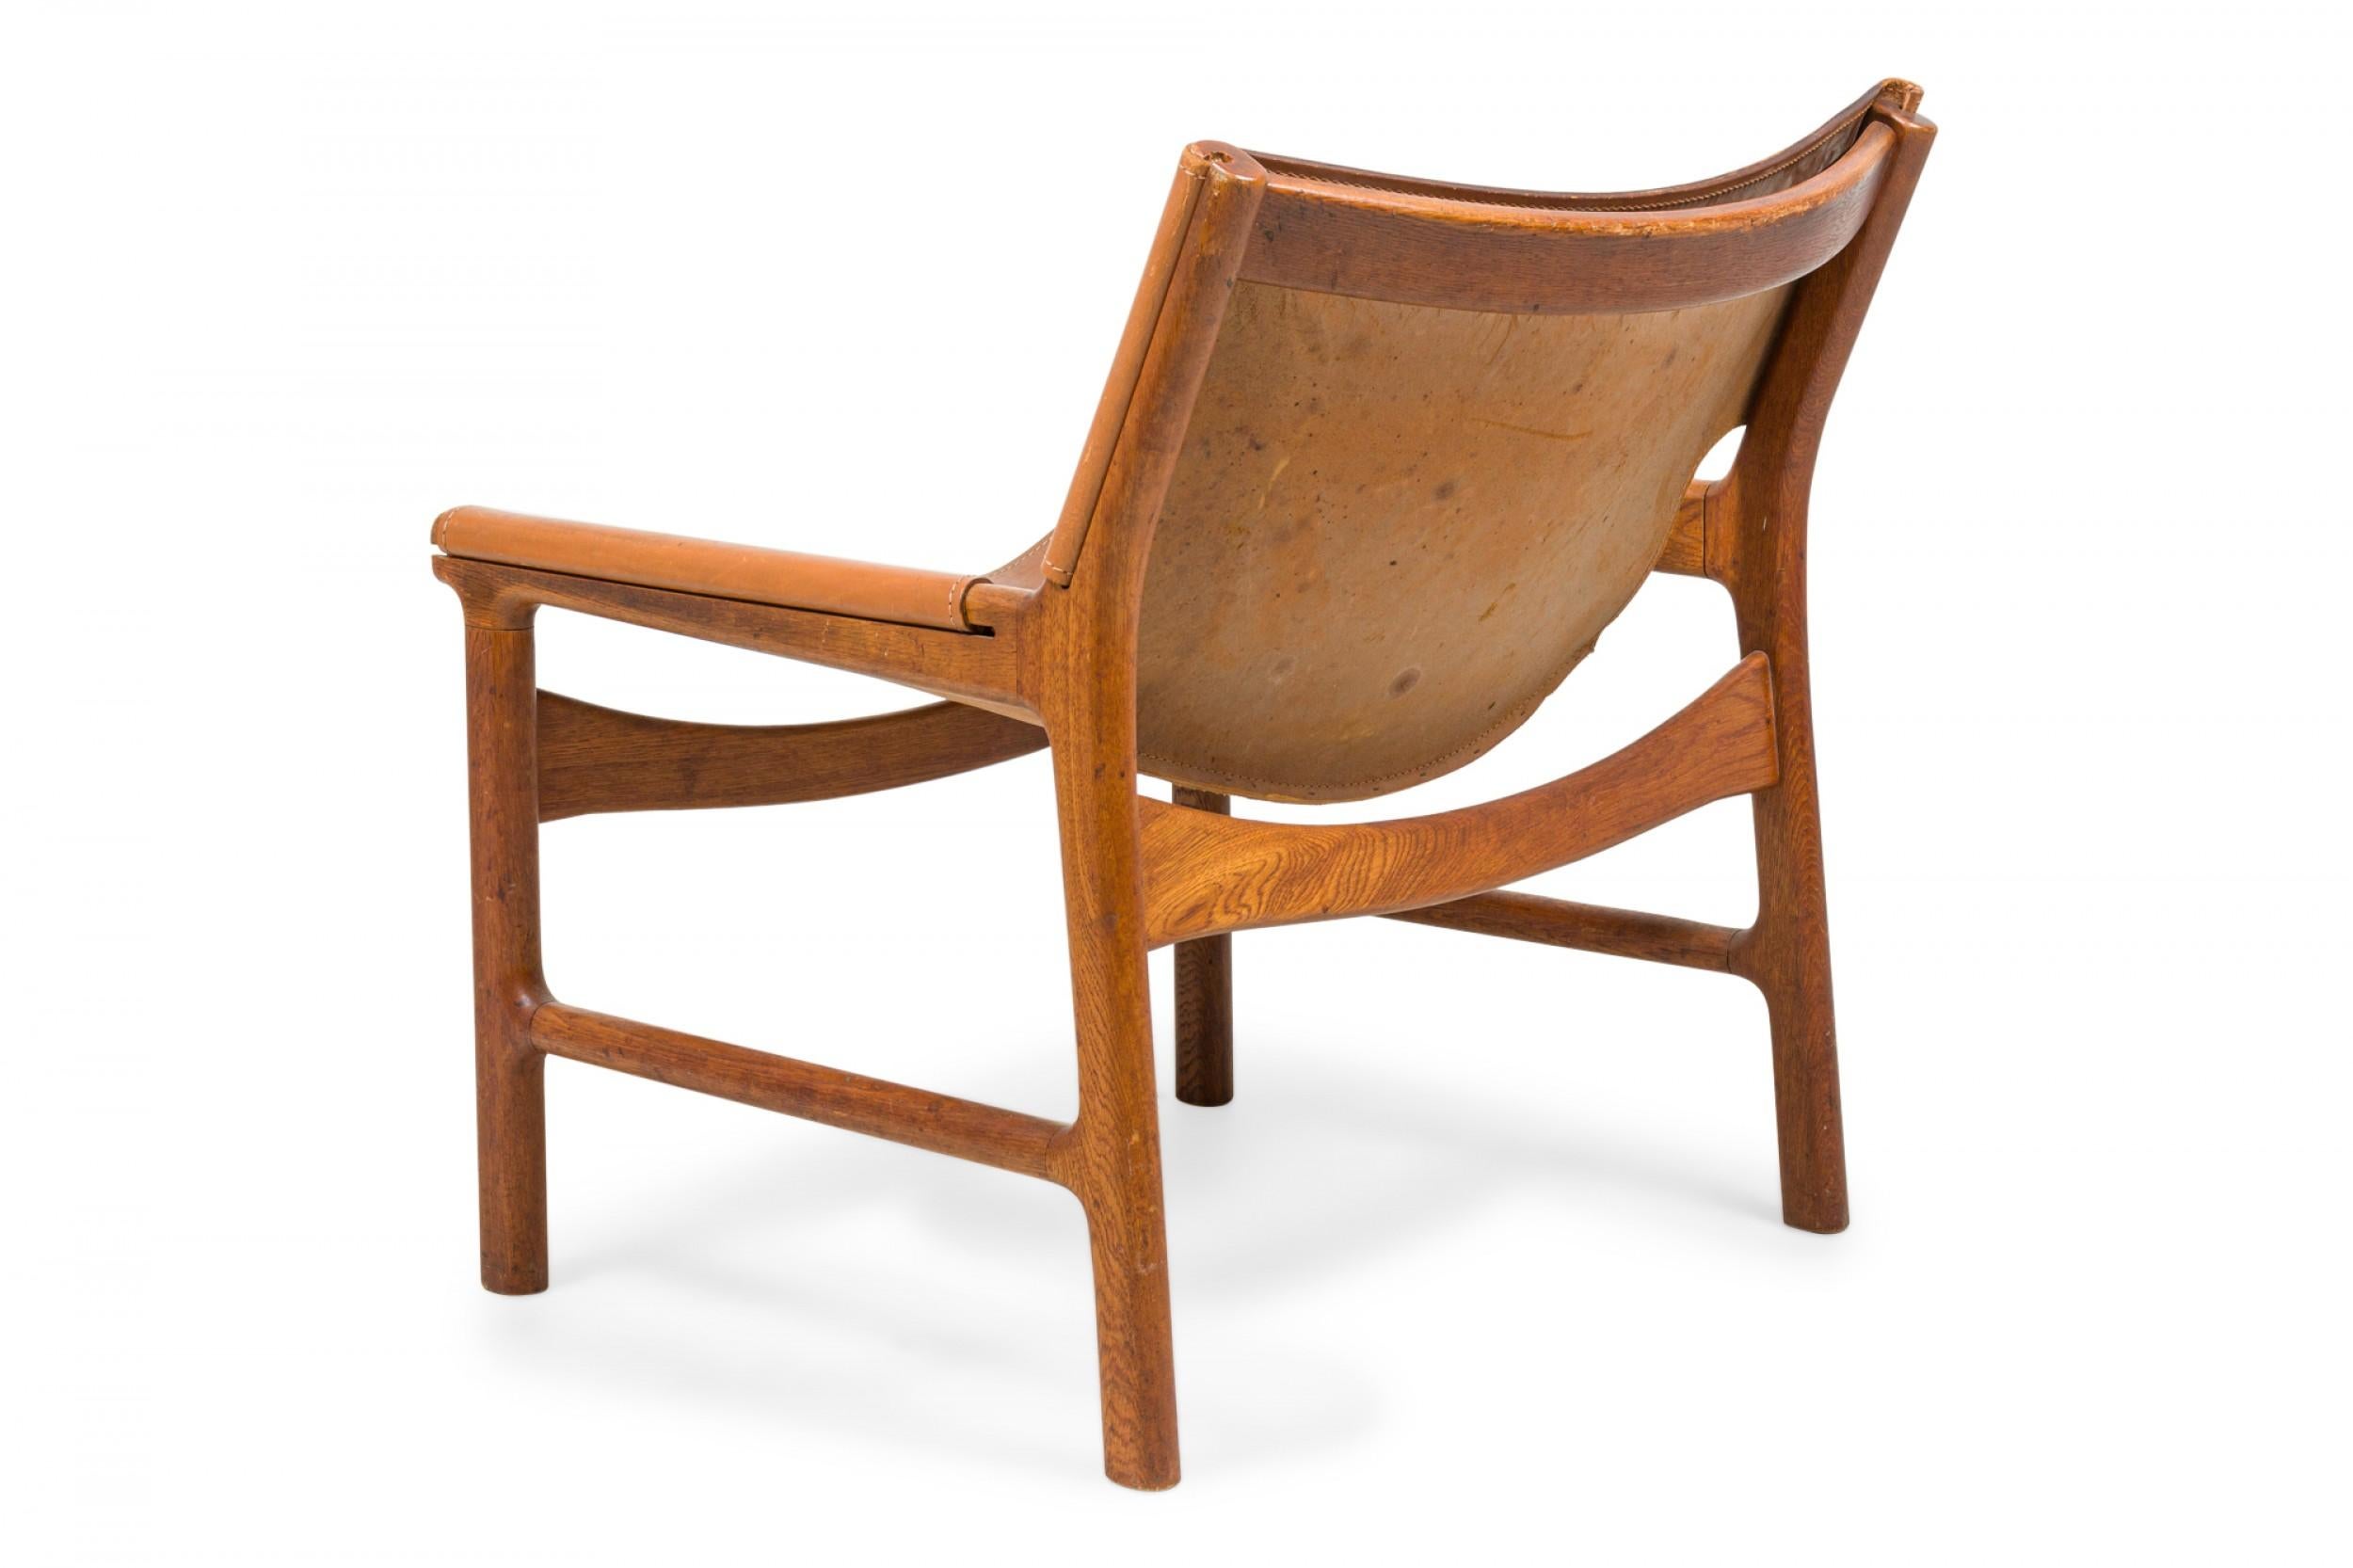 20th Century Pair of Illum Wikkelsø Caramel Leather and Oak Sling Design Lounge Chairs